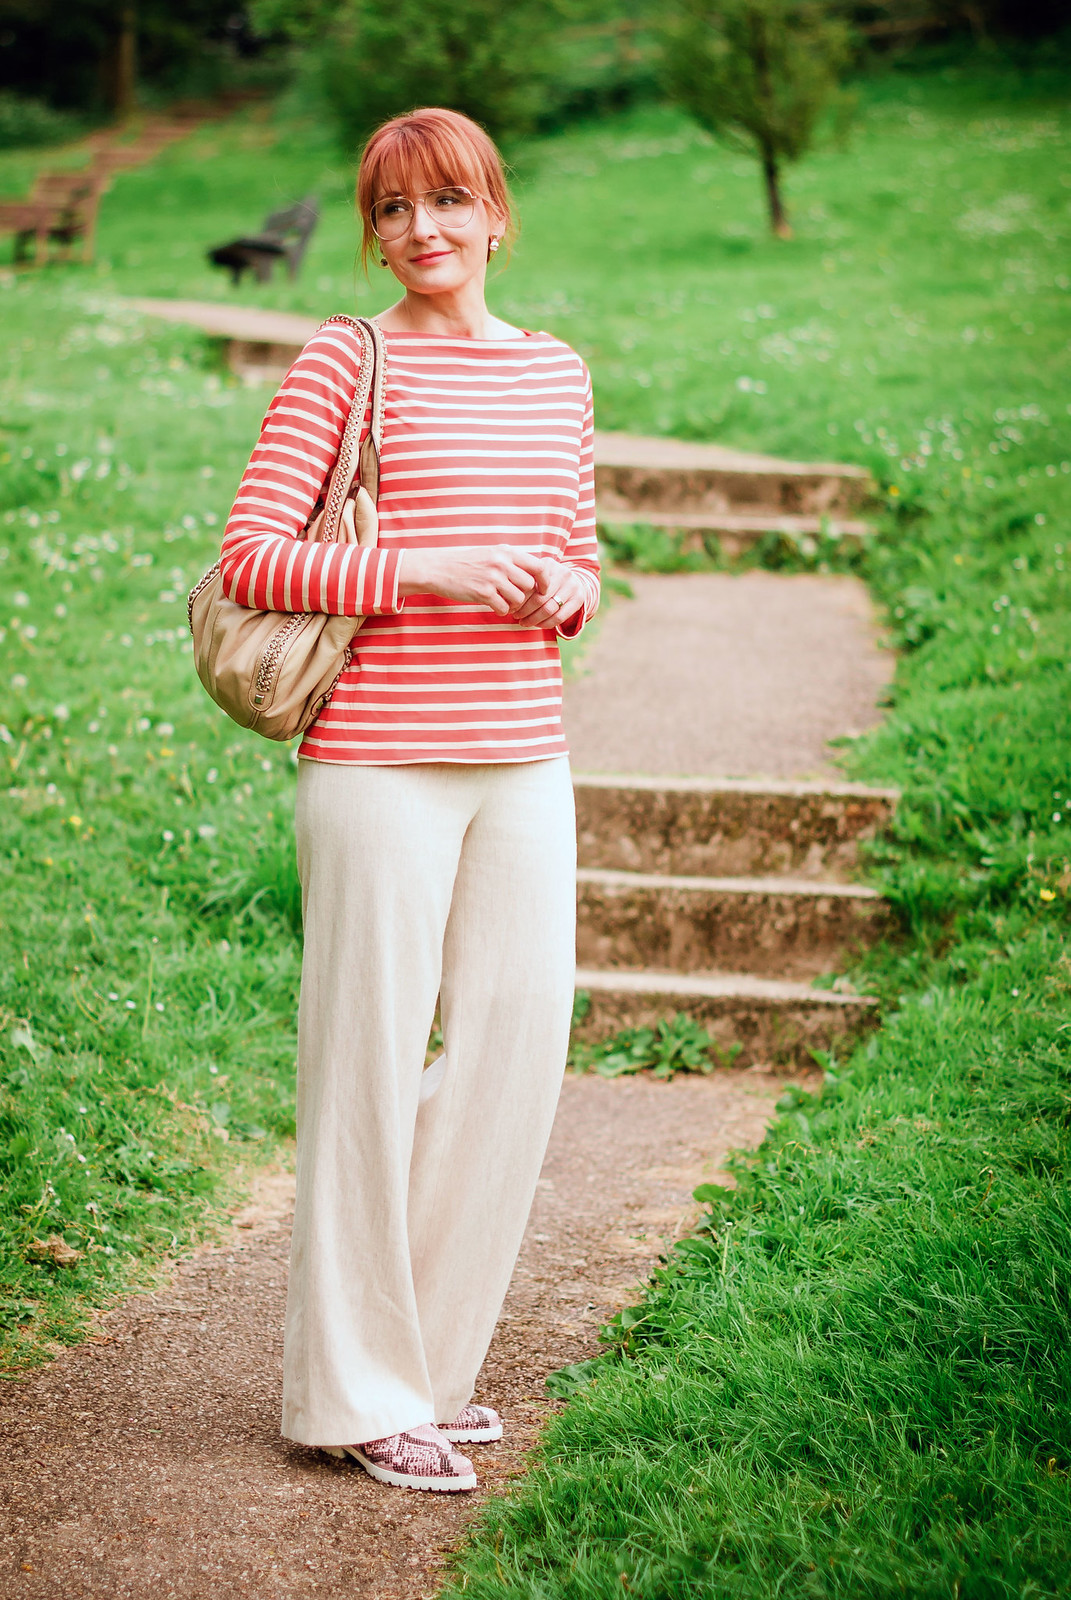 Loose, comfy summer style: Orange Breton stripe top wide leg cream trousers pink snakeskin shoes rose gold aviators | Not Dressed As Lamb, over 40 style